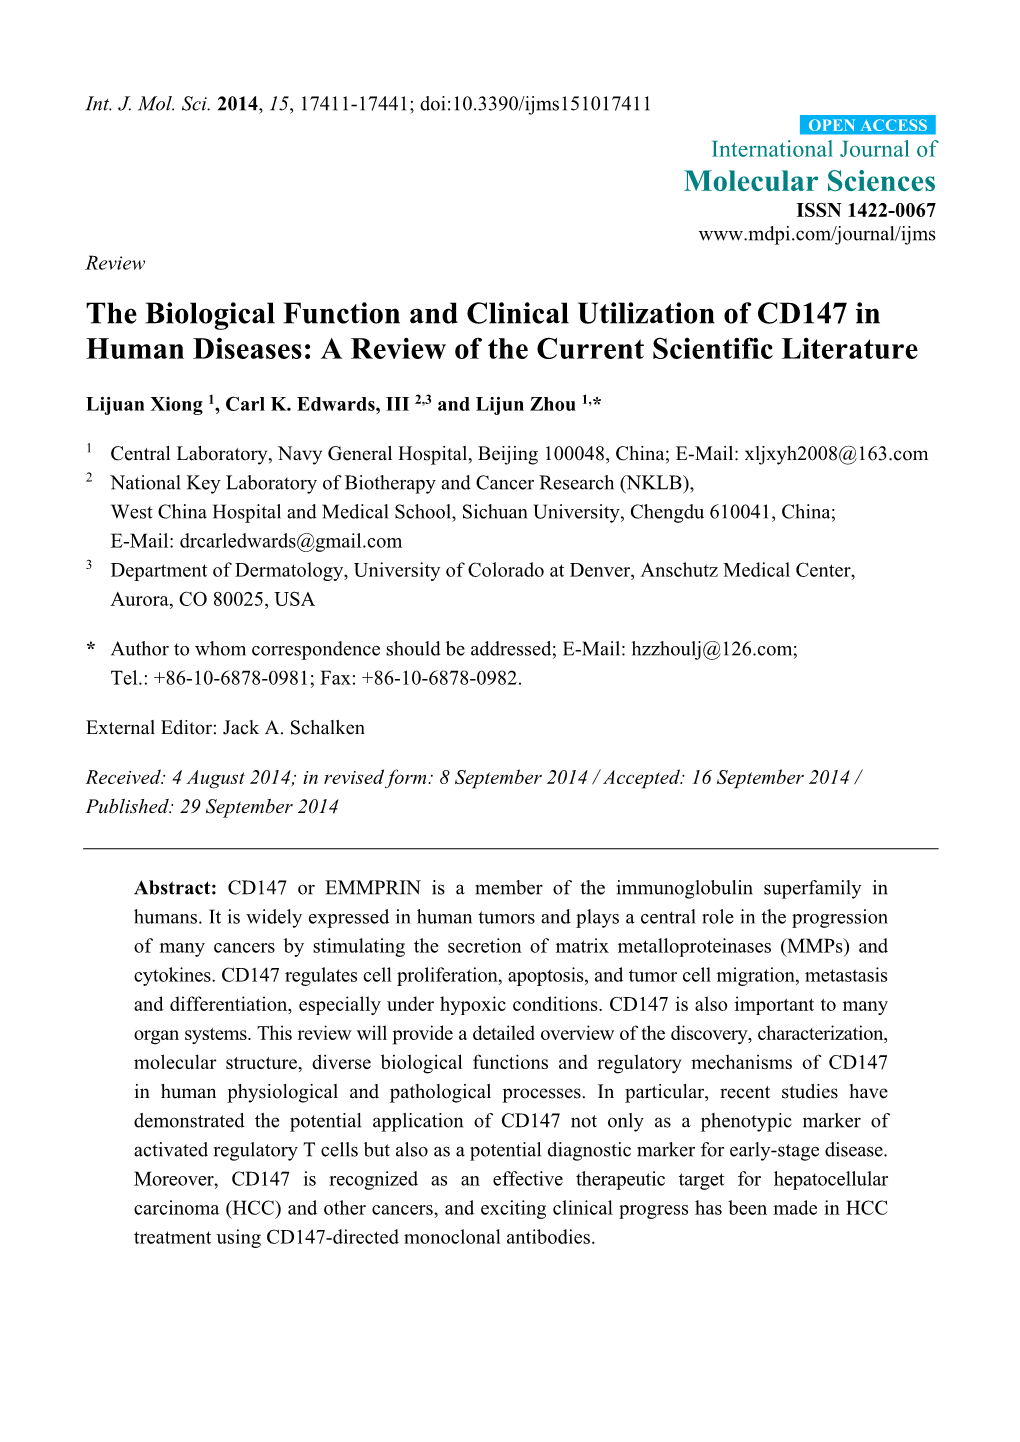 The Biological Function and Clinical Utilization of CD147 in Human Diseases: a Review of the Current Scientific Literature